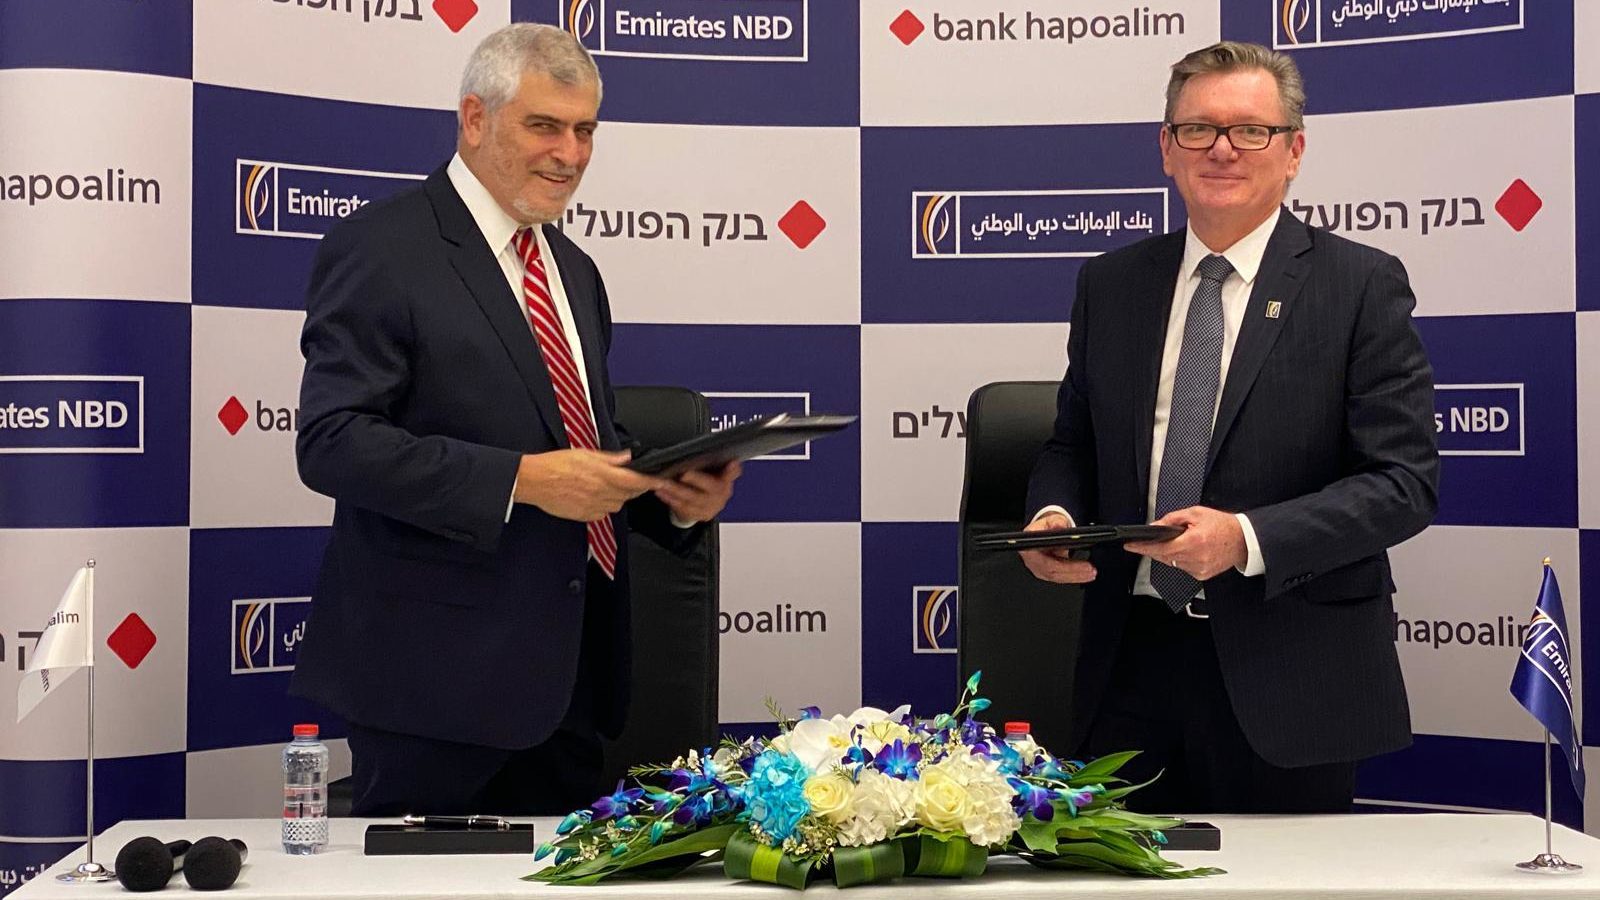 Israel, UAE Banking Deals First Step in Greater Economic Cooperation, Analysts Say